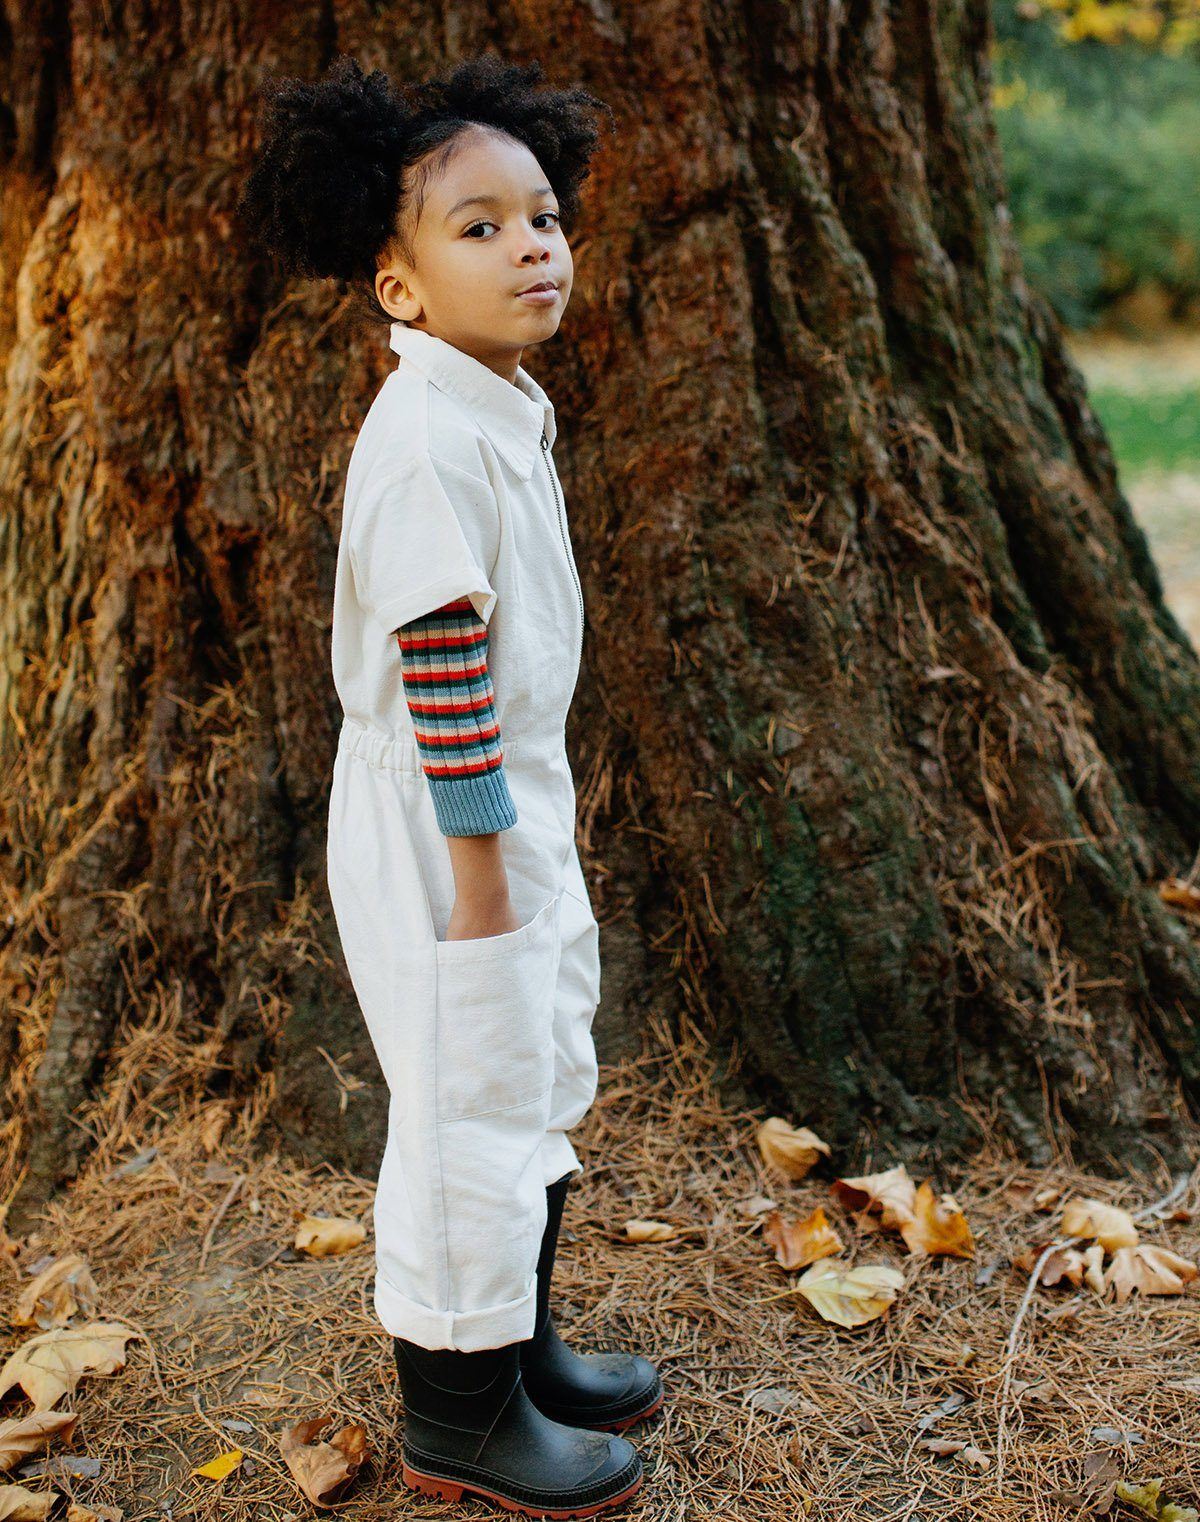 Noble's Utility Suit is durable enough to hold up to your child’s play, but also soft enough to be against their delicate skin all day. Made in Peru with GOTS certified organic Pima cotton canvas.